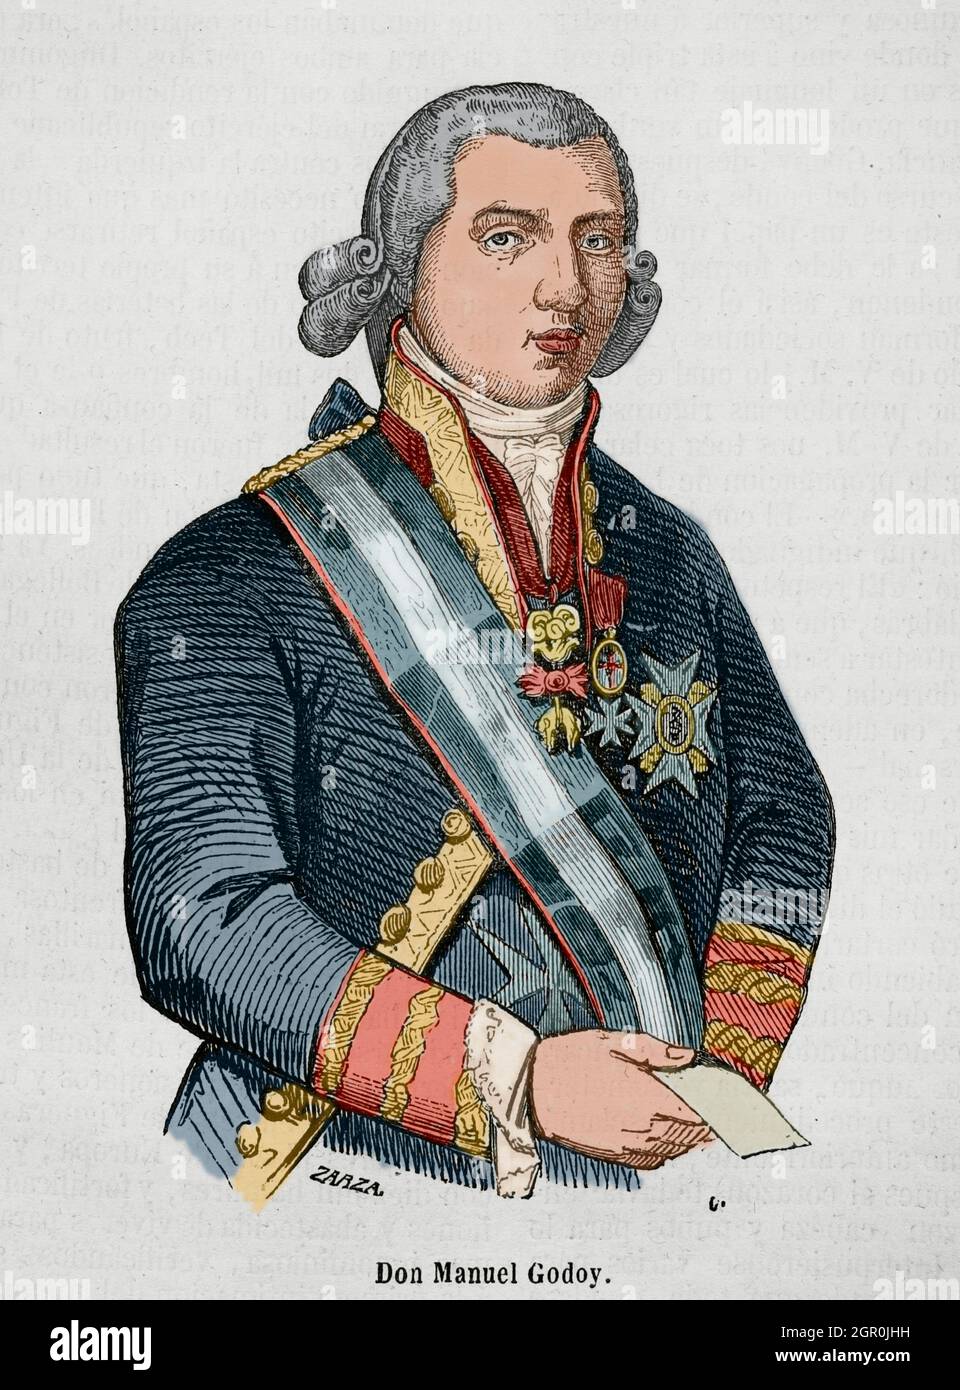 Manuel de Godoy y Alvarez de Faria (1767-1851). Spanish politician. First Secretary of State of Spain from 1792 to 1797. 'Prince of Peace' and favourite of Charles IV and Queen Maria Luisa. Illustration by Zarza. Portrait. Engraving. Later colouration. Historia General de España by Father Mariana. Madrid, 1853. Stock Photo